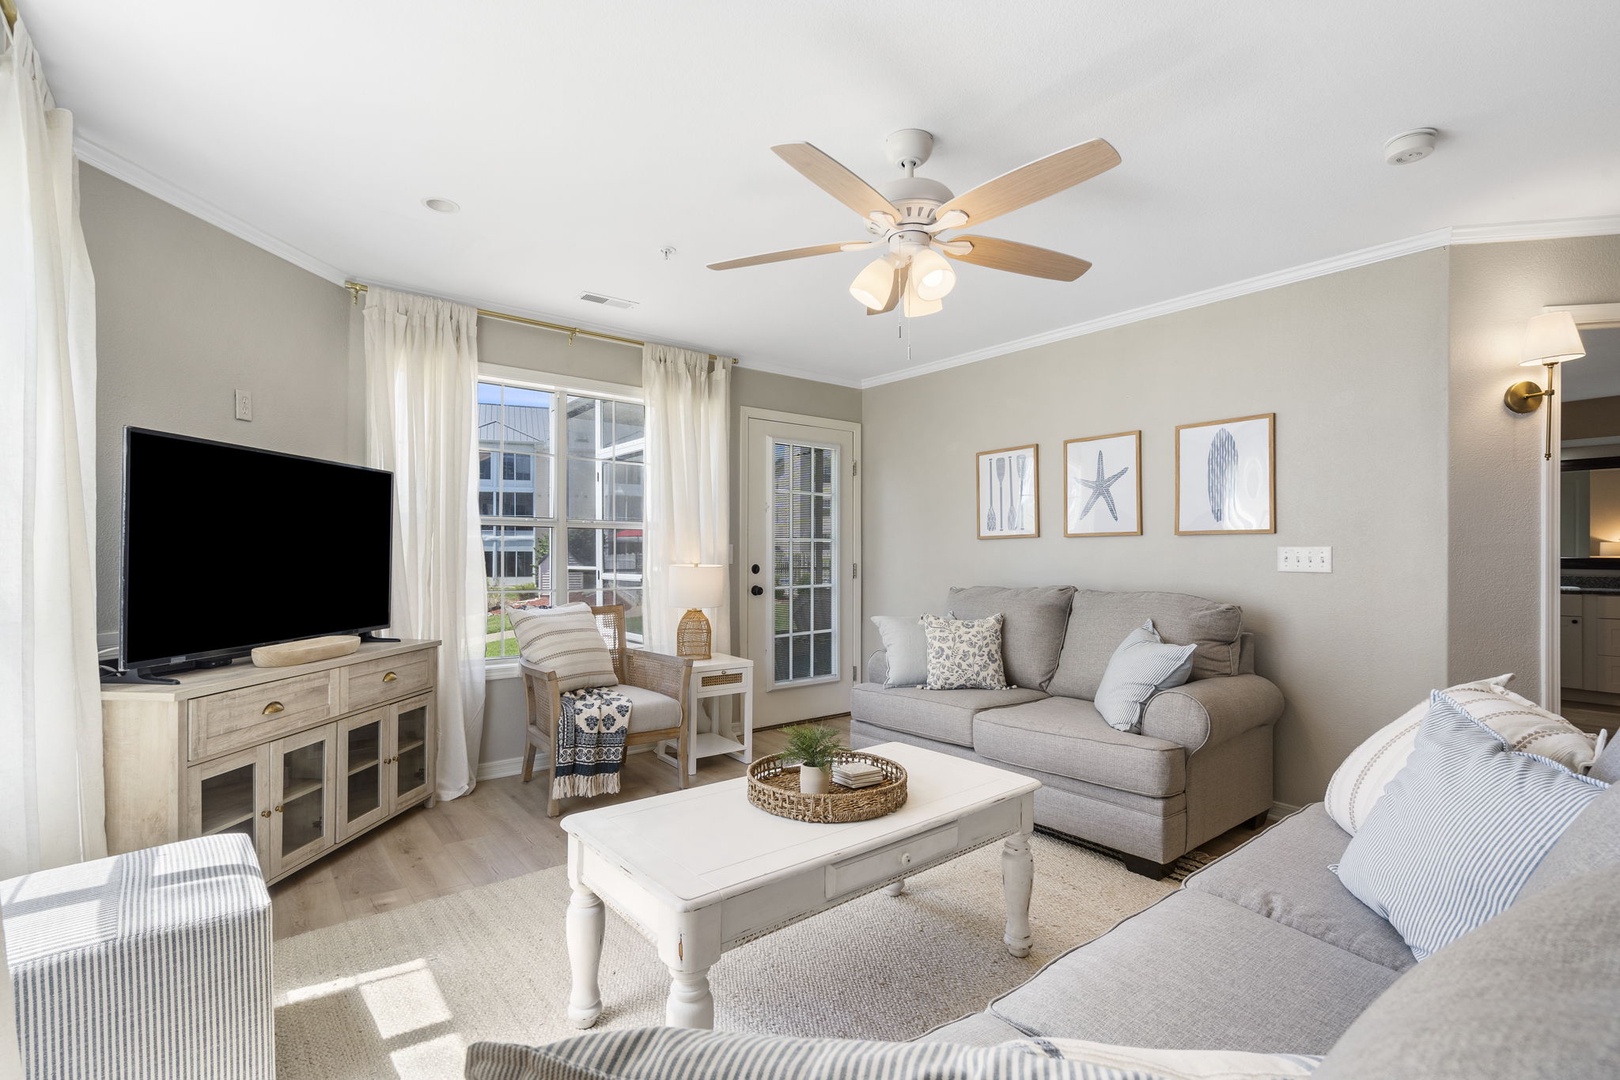 Curl up for a movie or a show in the airy, comfortable living room